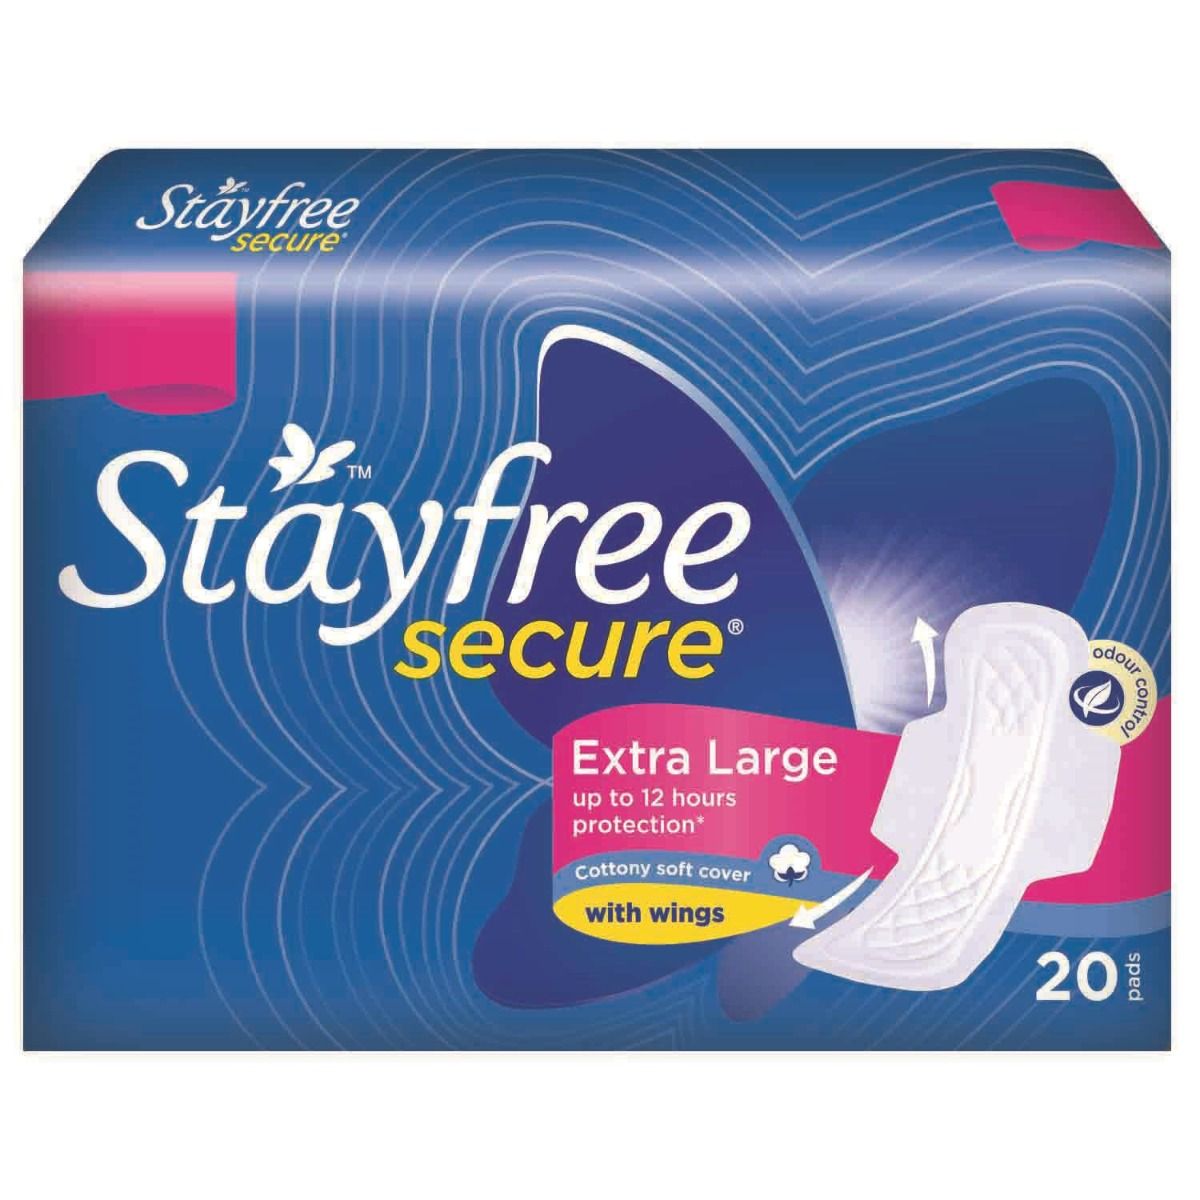 Stayfree Secure Pads with Wings XL, 20 Count, Pack of 1 